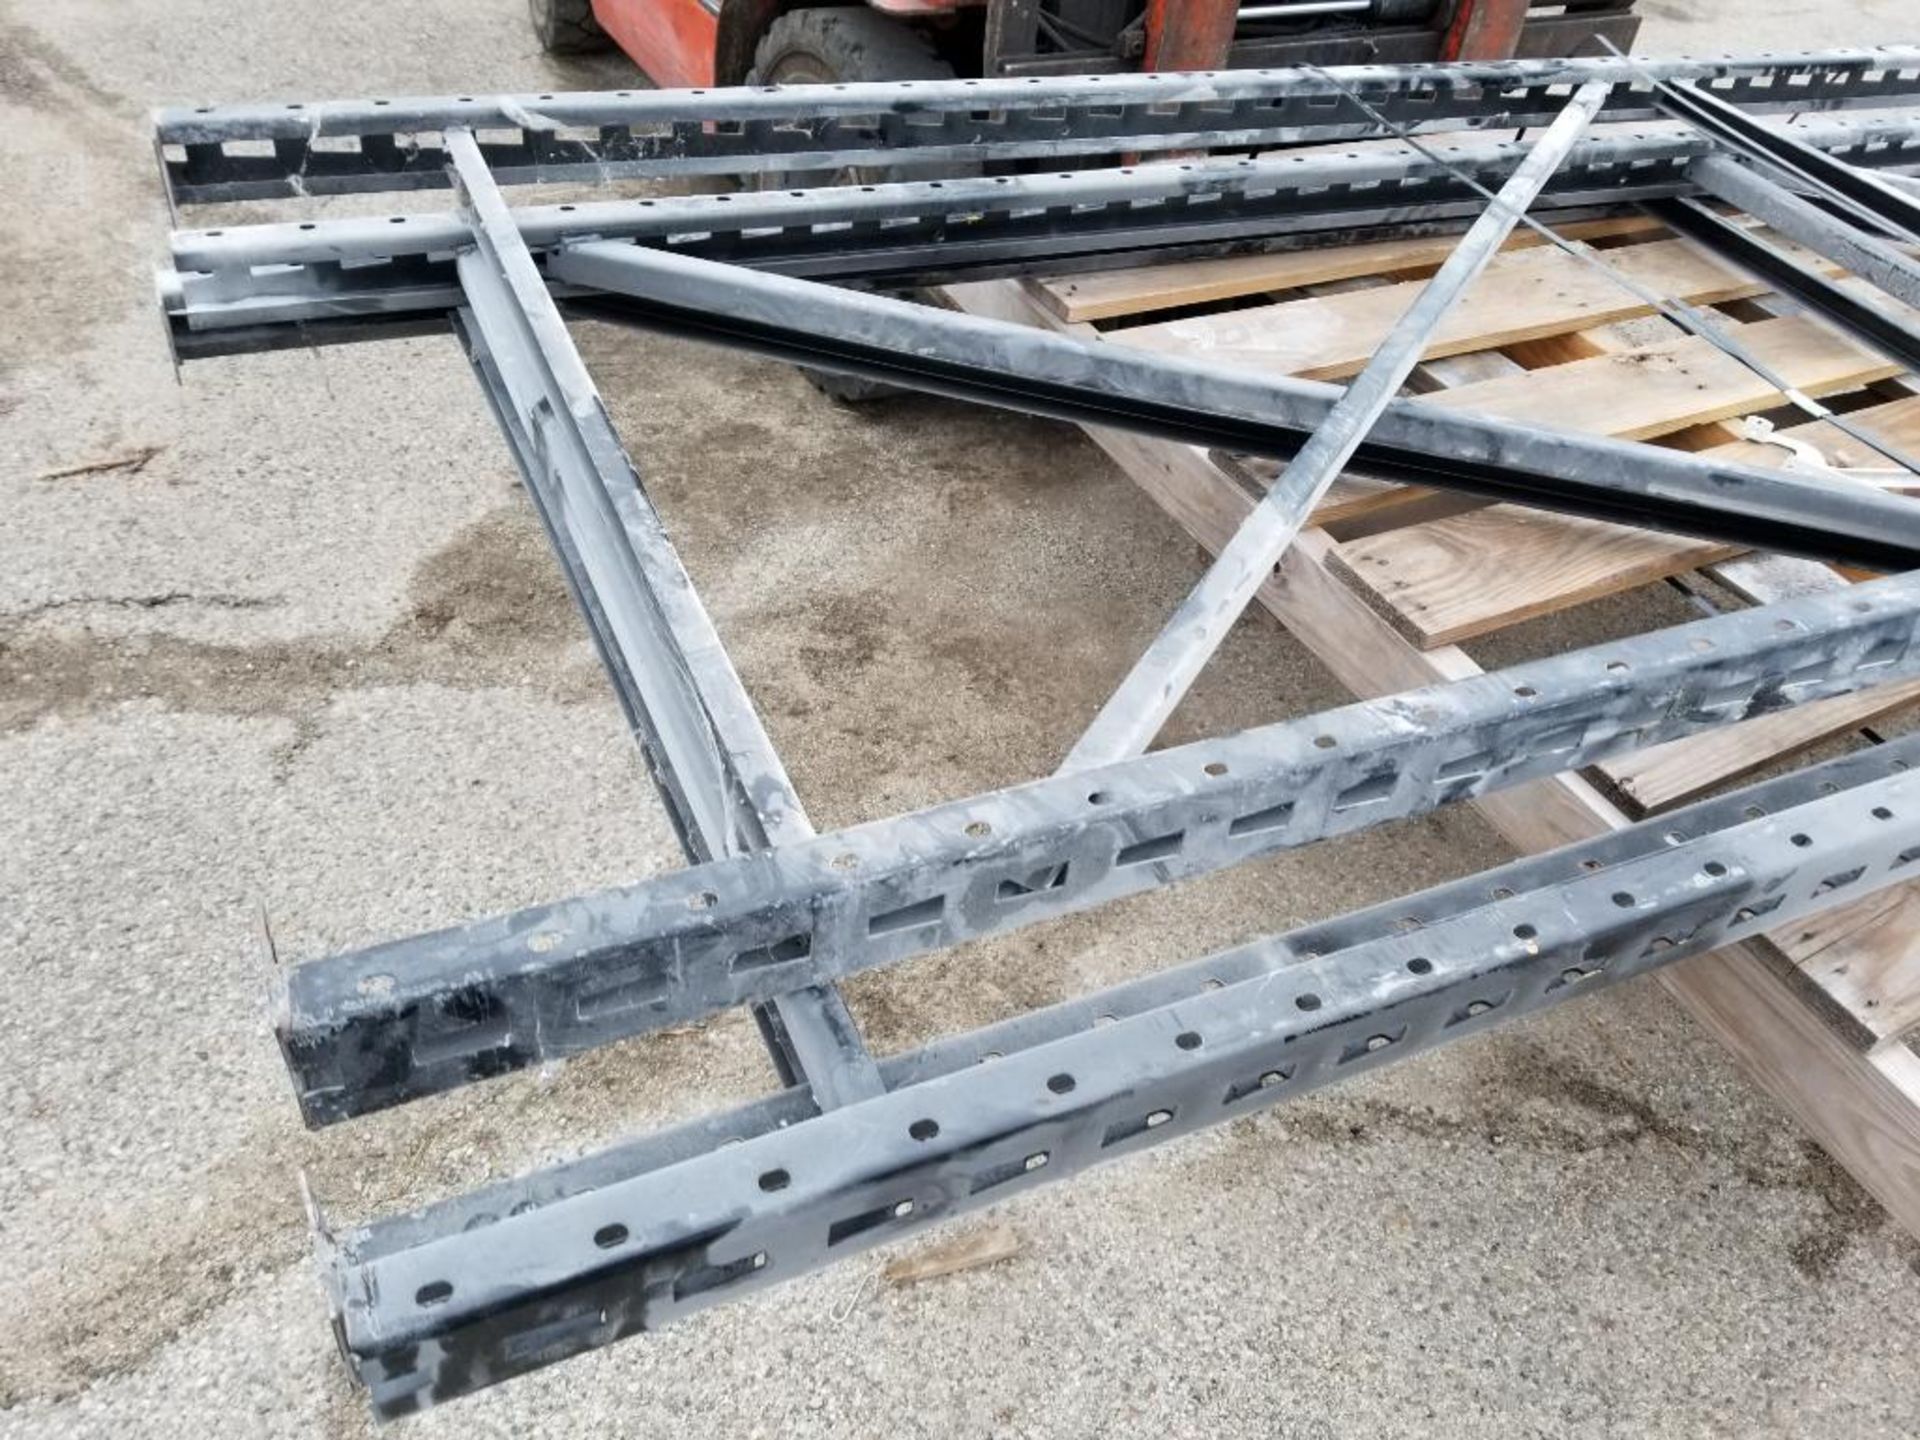 Qty 3 - Pallet racking uprights. 144in tall x 42in wide. - Image 4 of 6